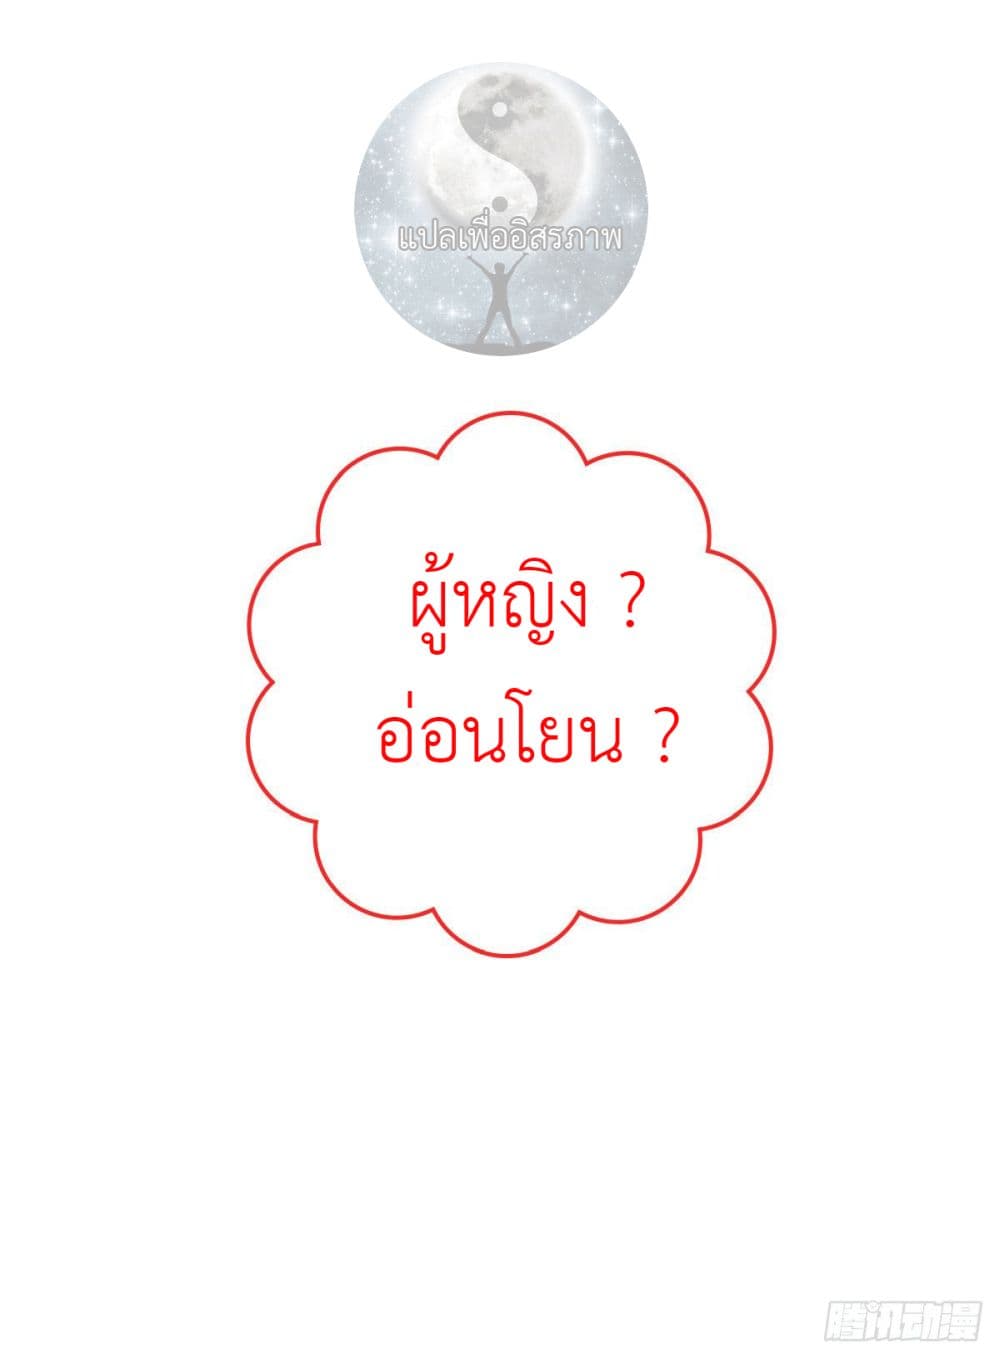 Miss, Something's Wrong With You สาวน้อยคุณคิดผิดแล้ว 0-0